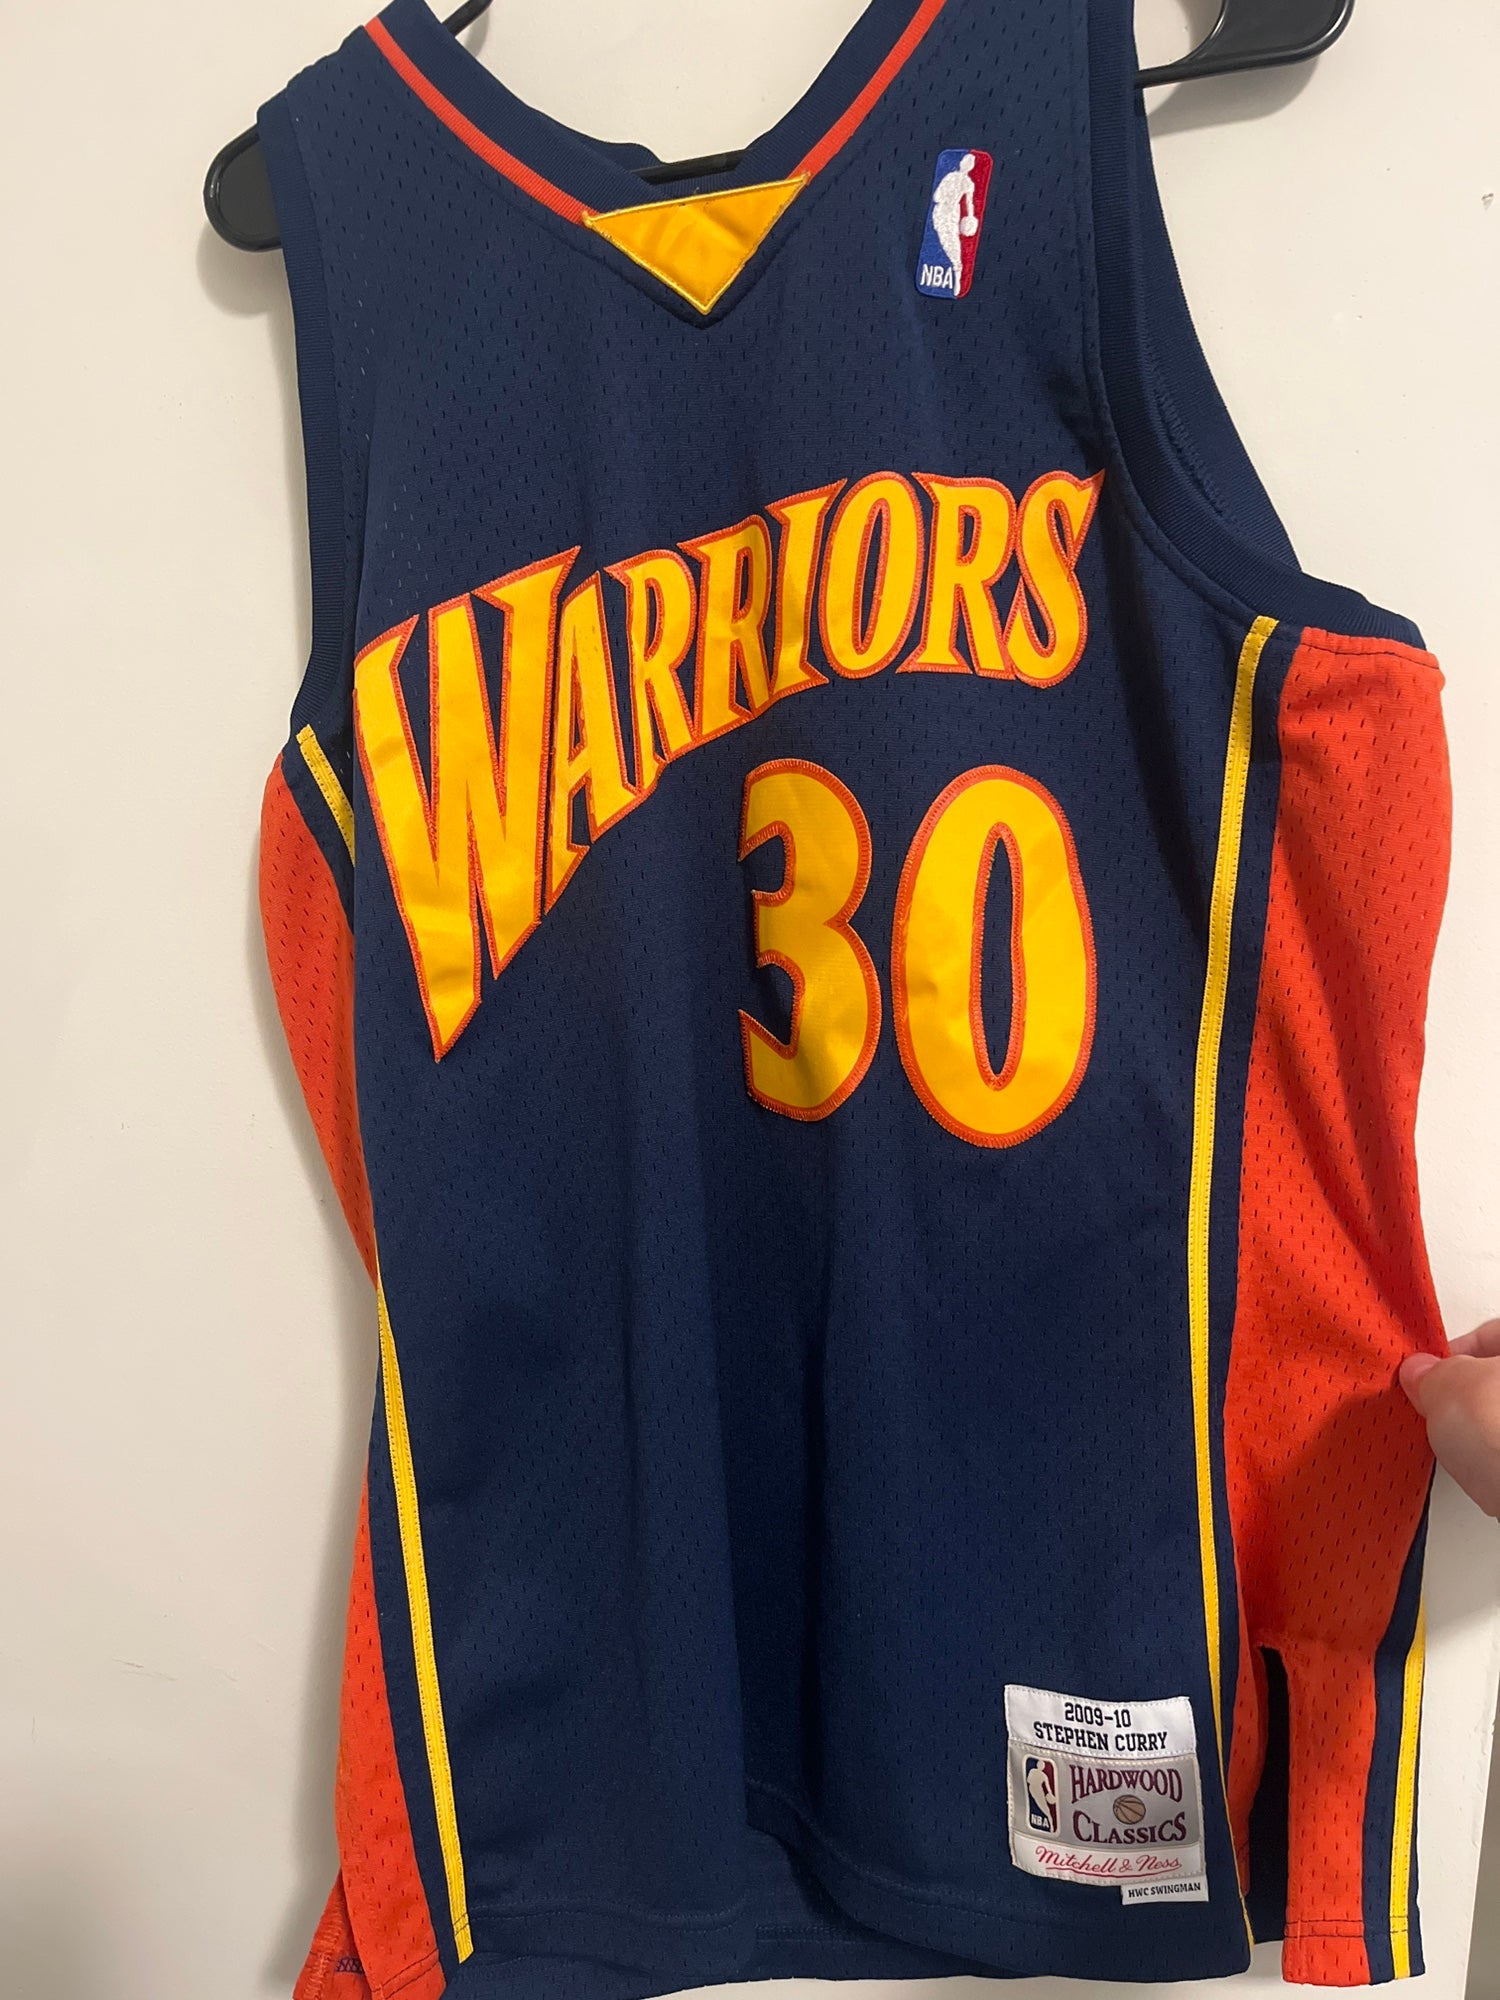 Steph Curry - Hardwood Classics Mitchell and Ness - WORN ONCE